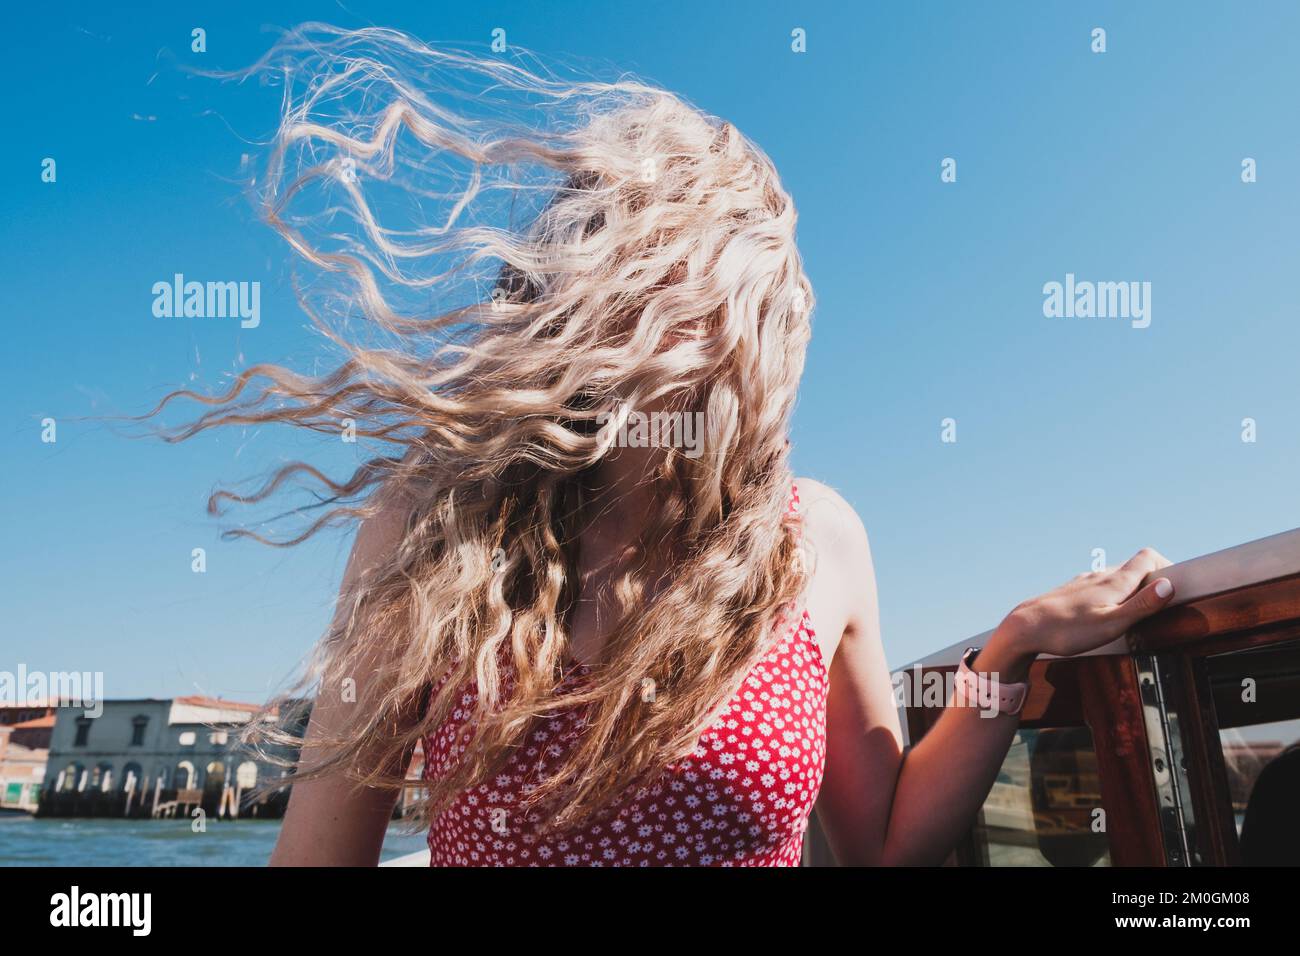 Girl's hair blowing in the wind on a speedboat, Venice Stock Photo